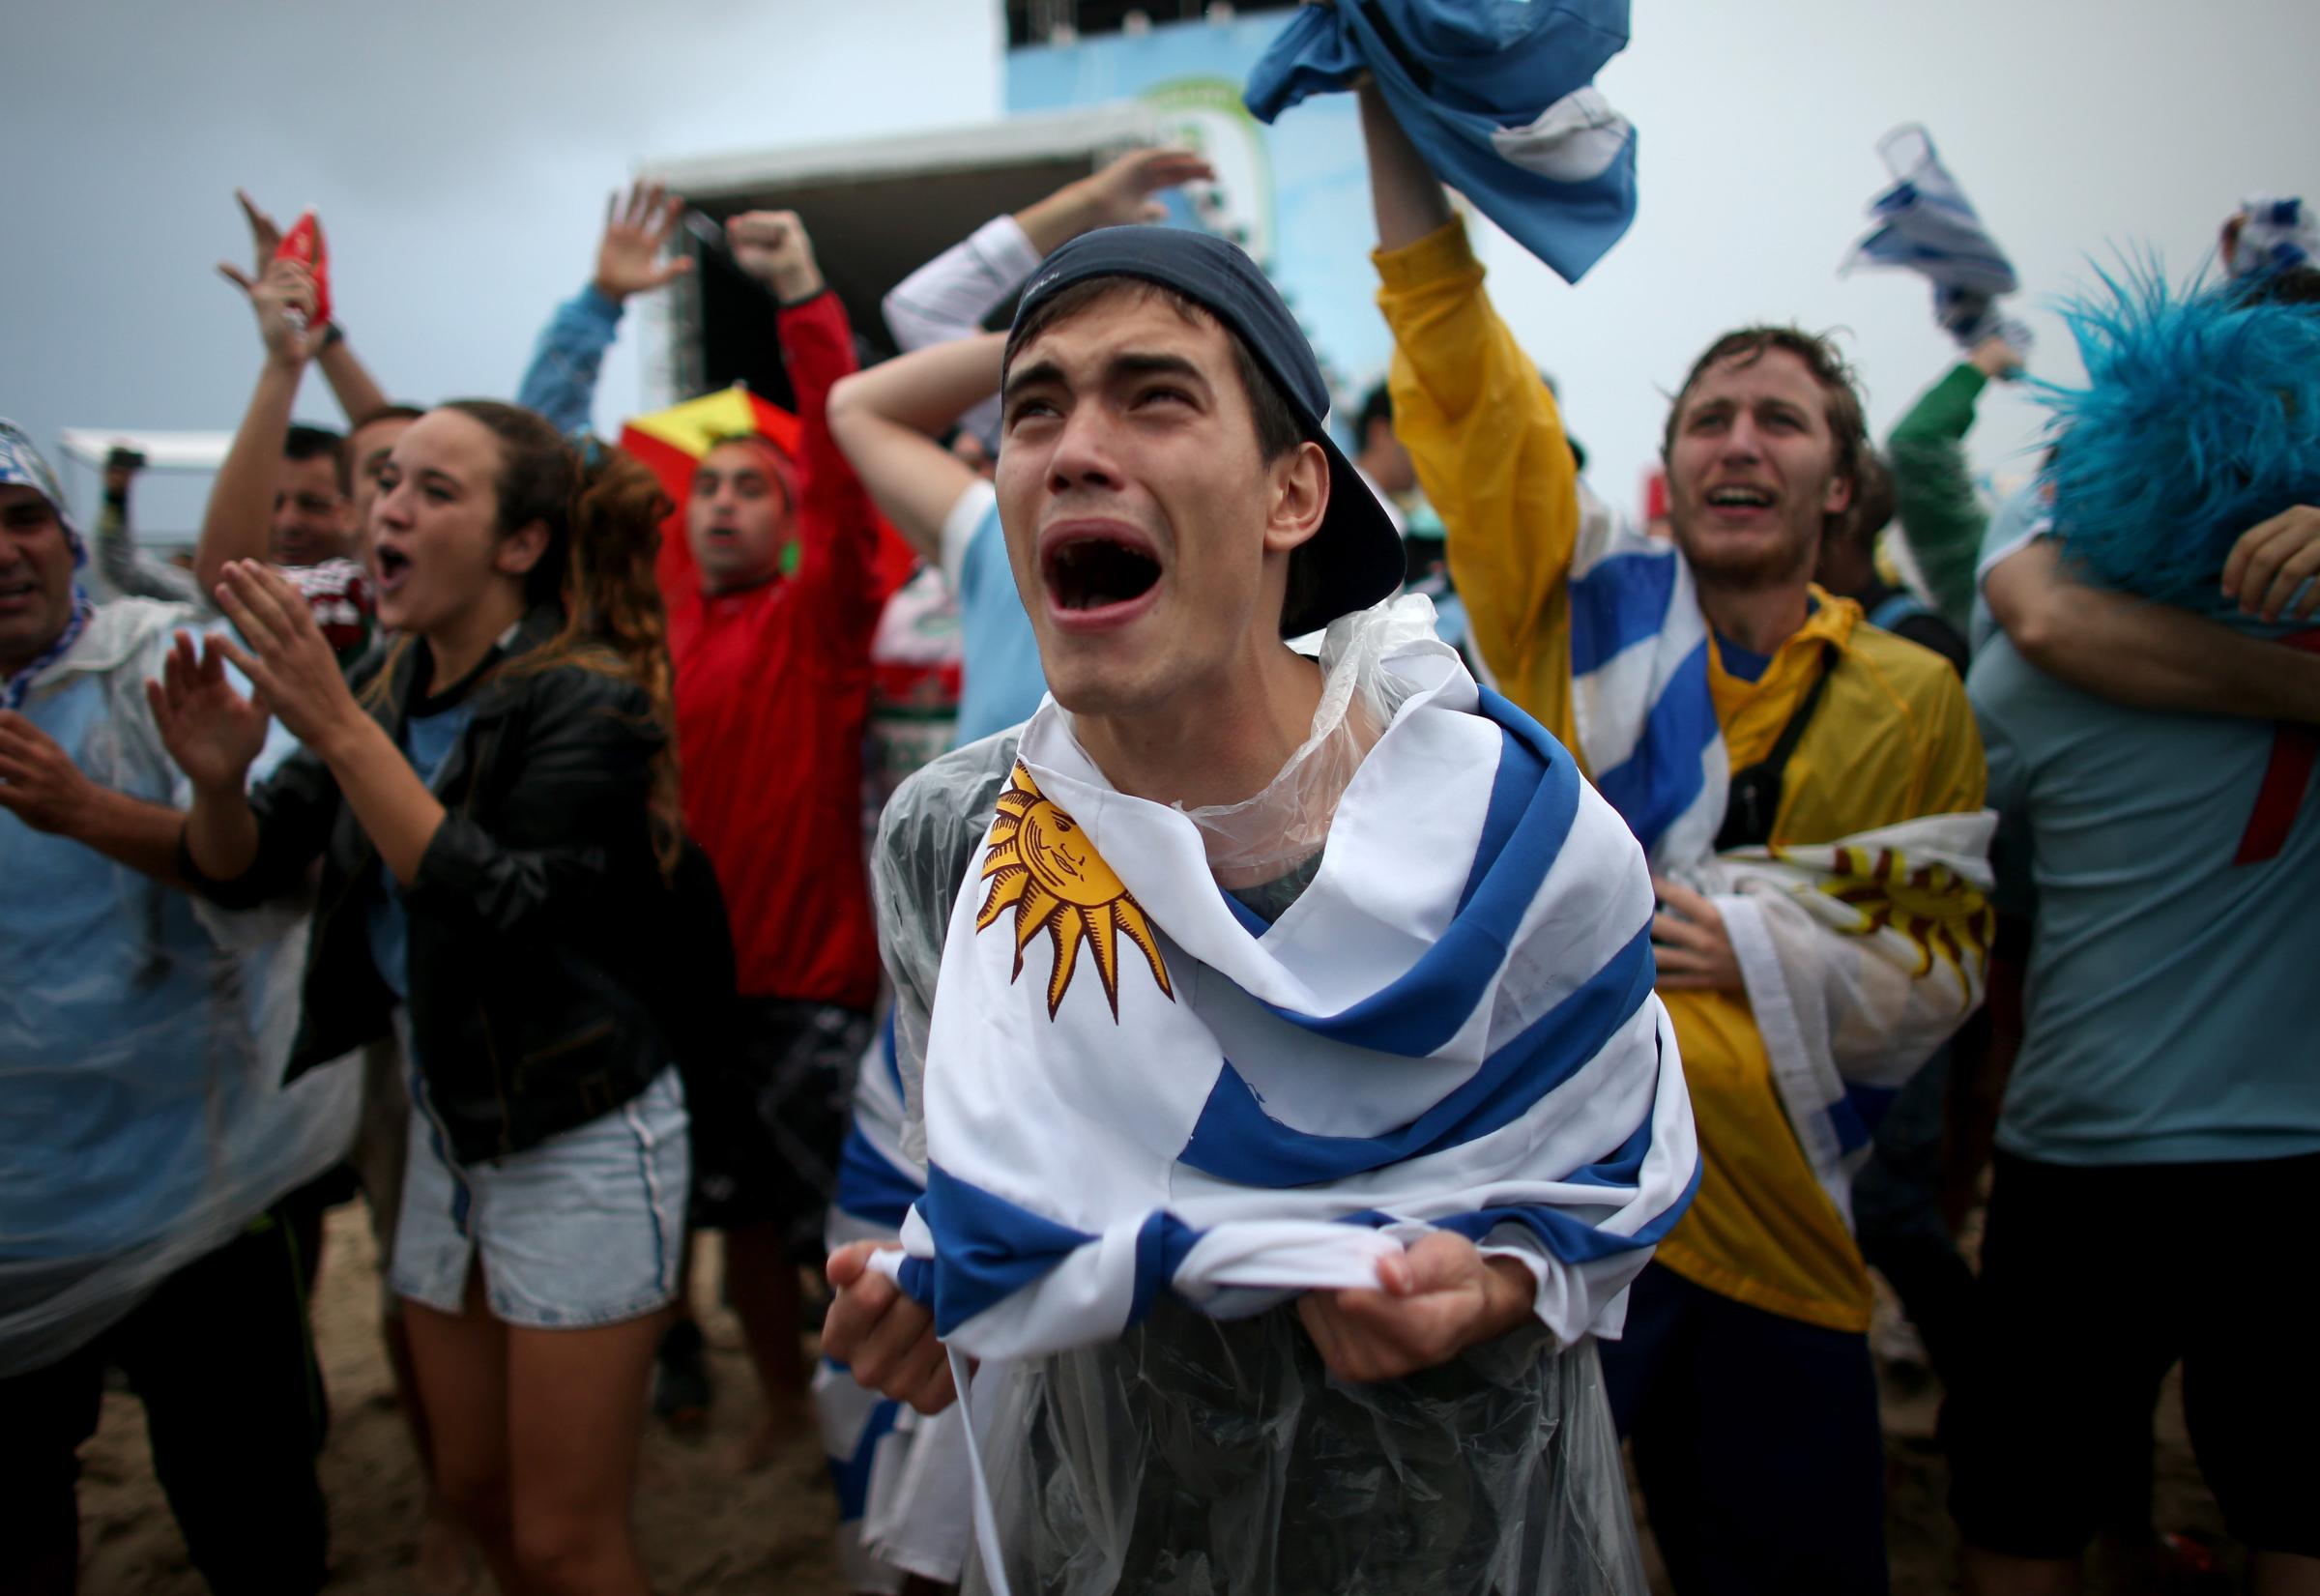 Uruguay fans celebrate as Uruguay scores their first goal against England as seen on the screen set up at Word Cup FIFA Fan Fest on Copacabana beach on June 19, 2014 in Rio de Janeiro.